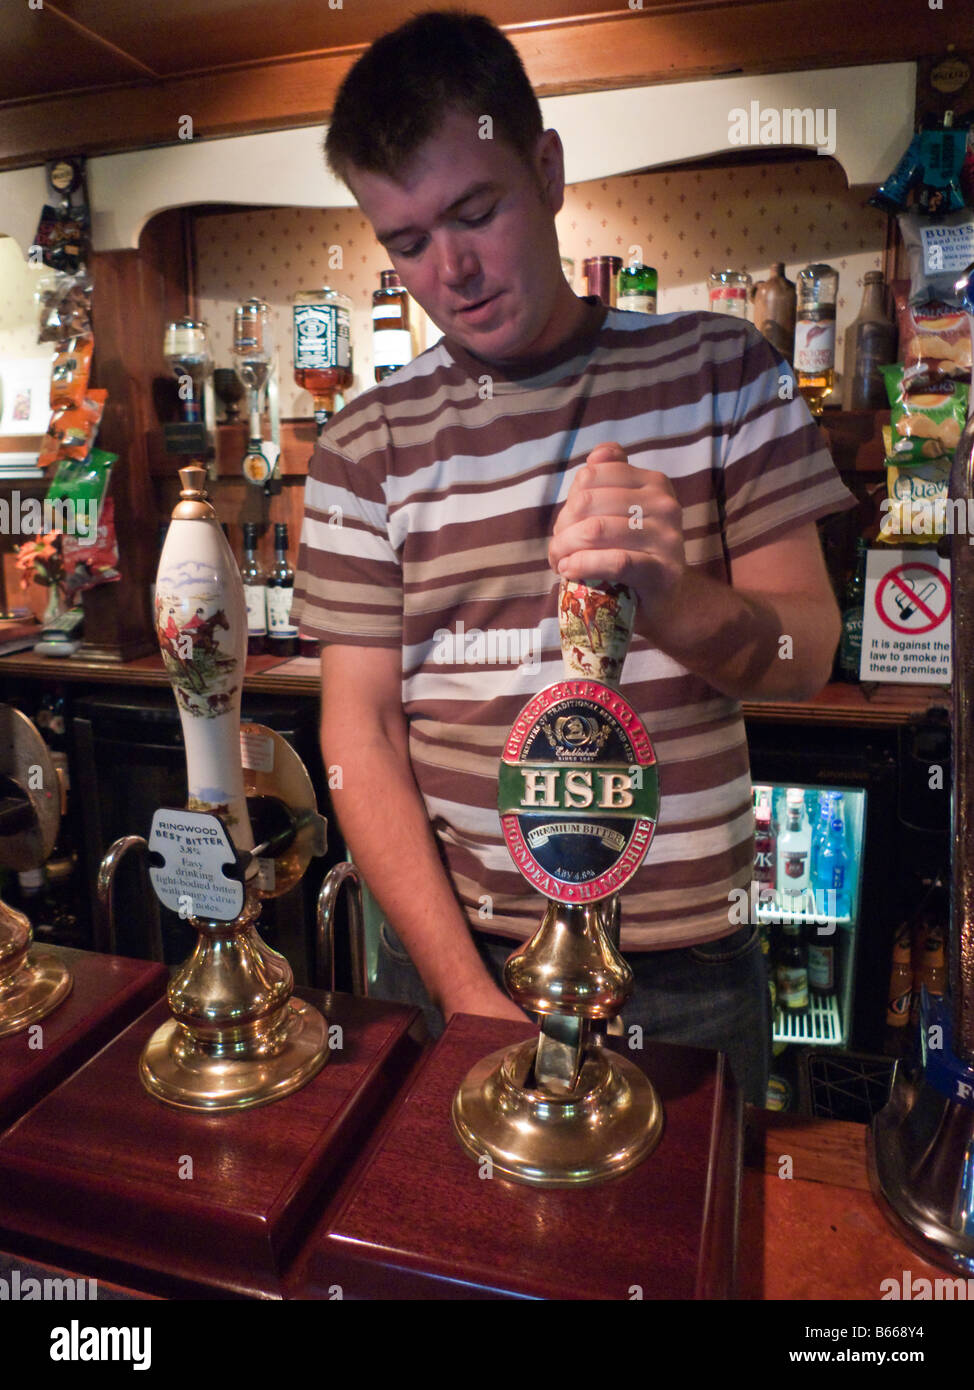 Barman pulling a pint of HSB beer at the Forest Inn Ashurst Hampshire Stock Photo